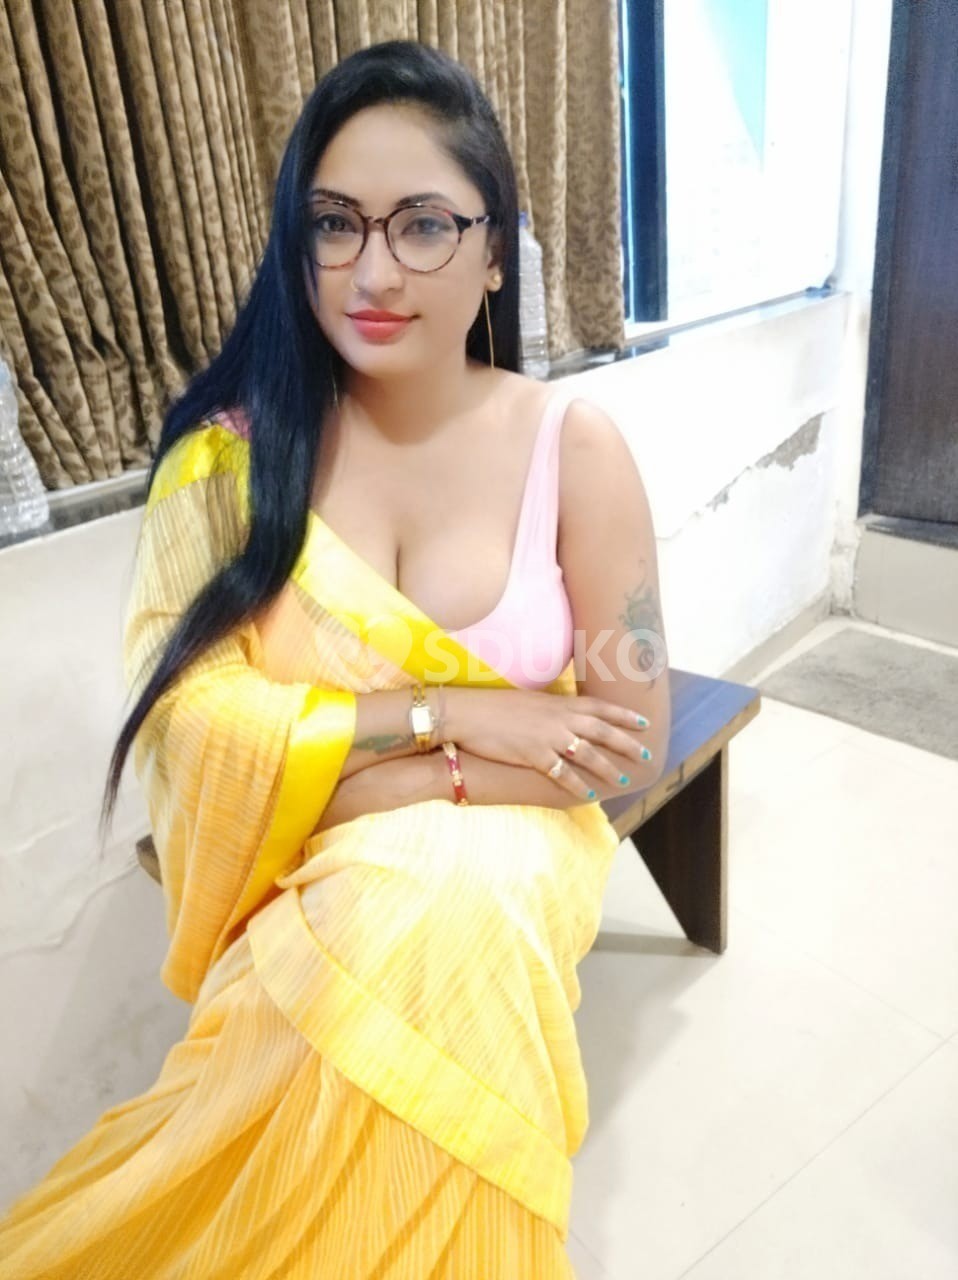 NILIMA Pandey LOW PRICE🔸✅ SERVICE AVAILABLE 100% SAFE AND SECURE UNLIMITED ENJOY HOT COLLEGE GIRL HOUSEWIFE AUNTIE